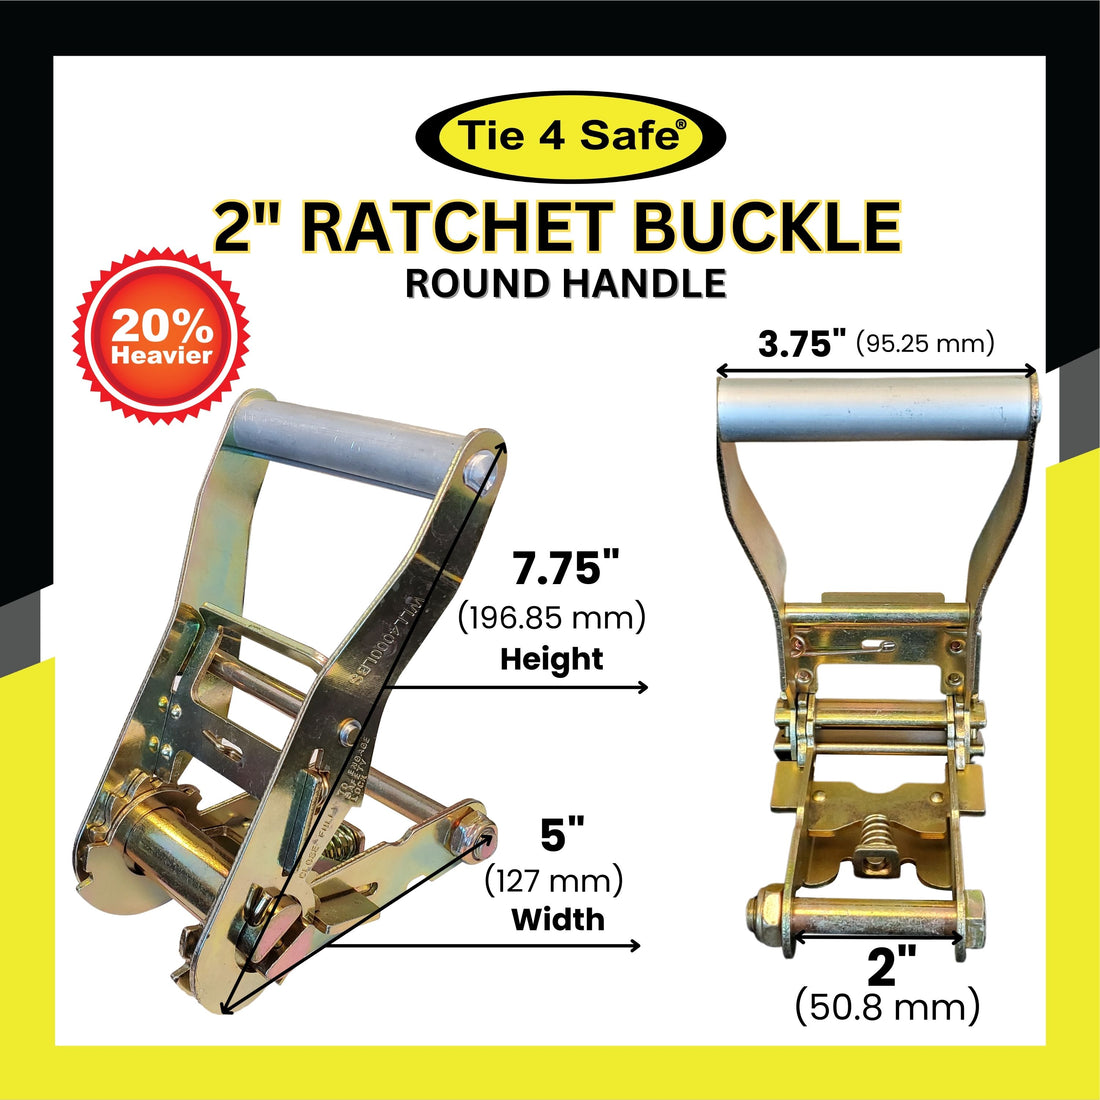 2" Ratchet Buckle With Handle Alum Grip. Double Security Corrugated